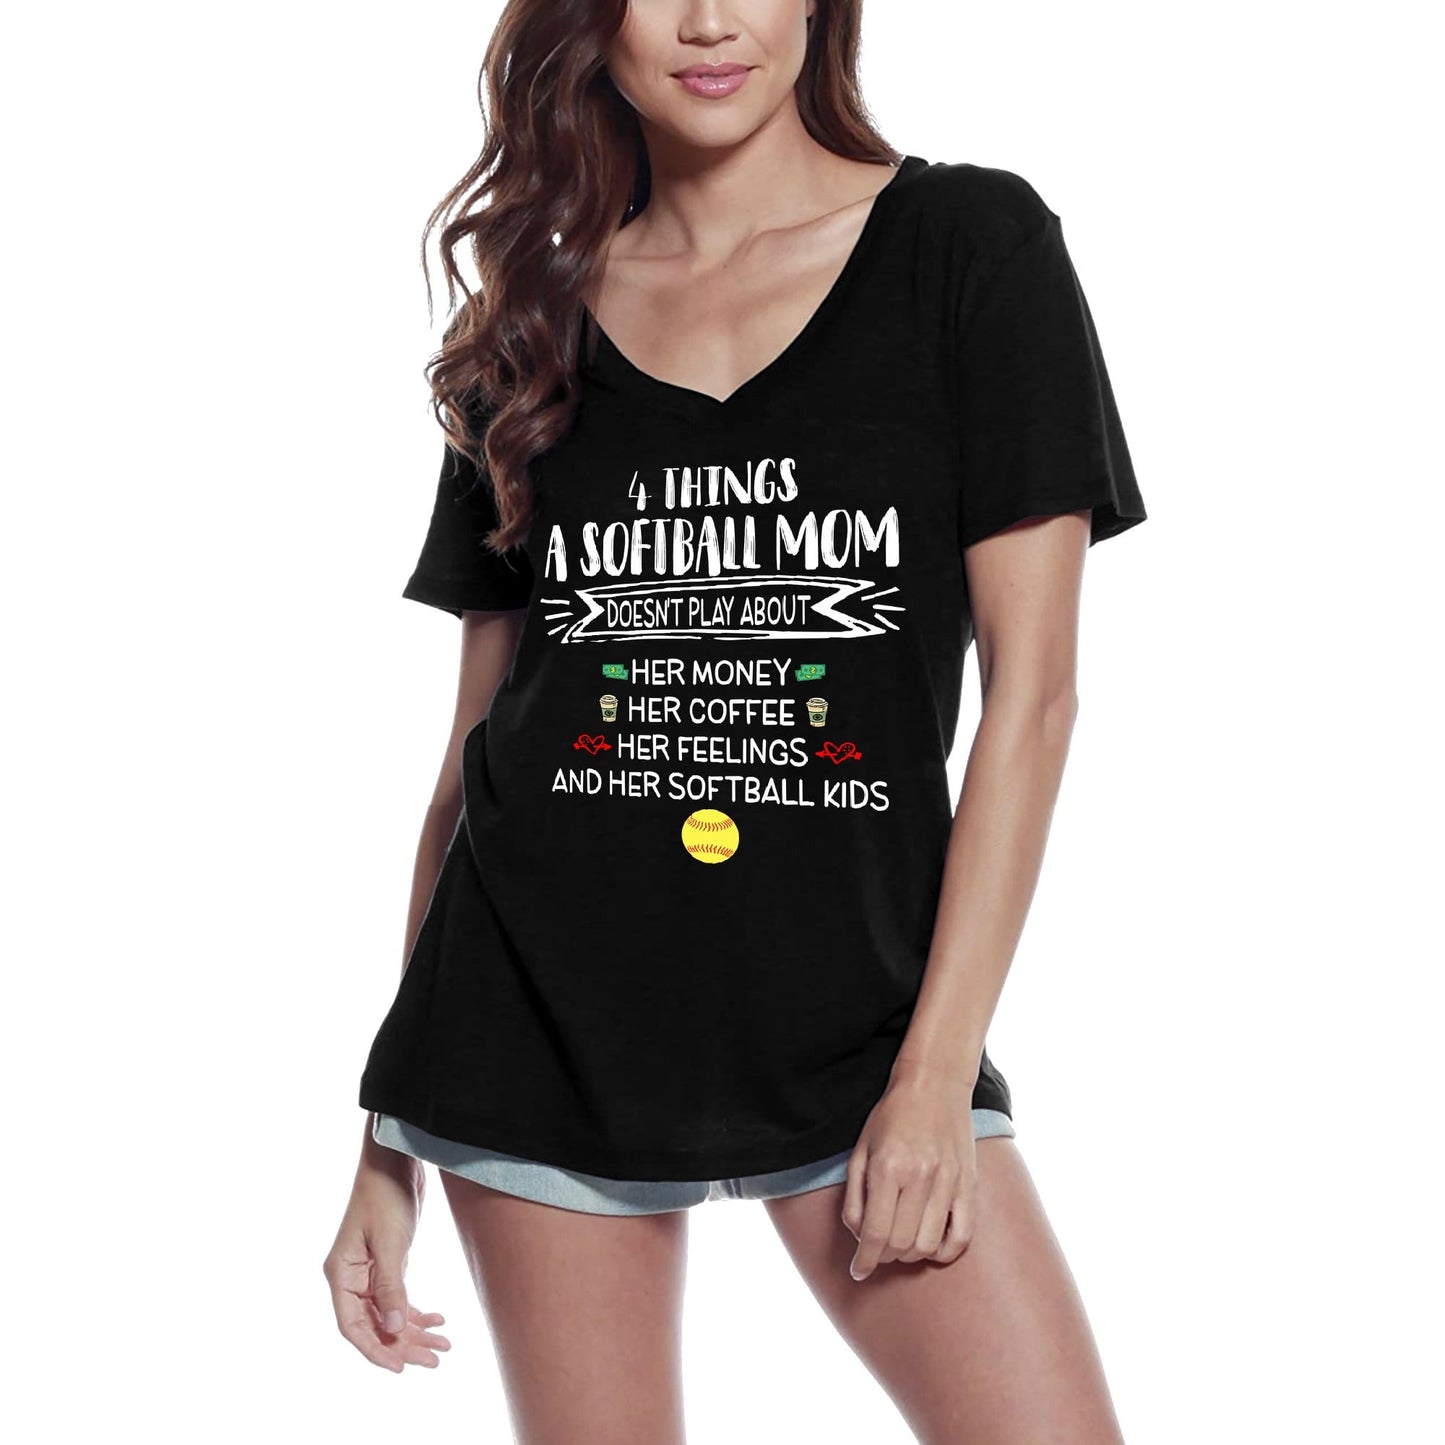 ULTRABASIC Women's T-Shirt 4 Things Softball Mom Doesn't Play About - Funny Mother Tee Shirt